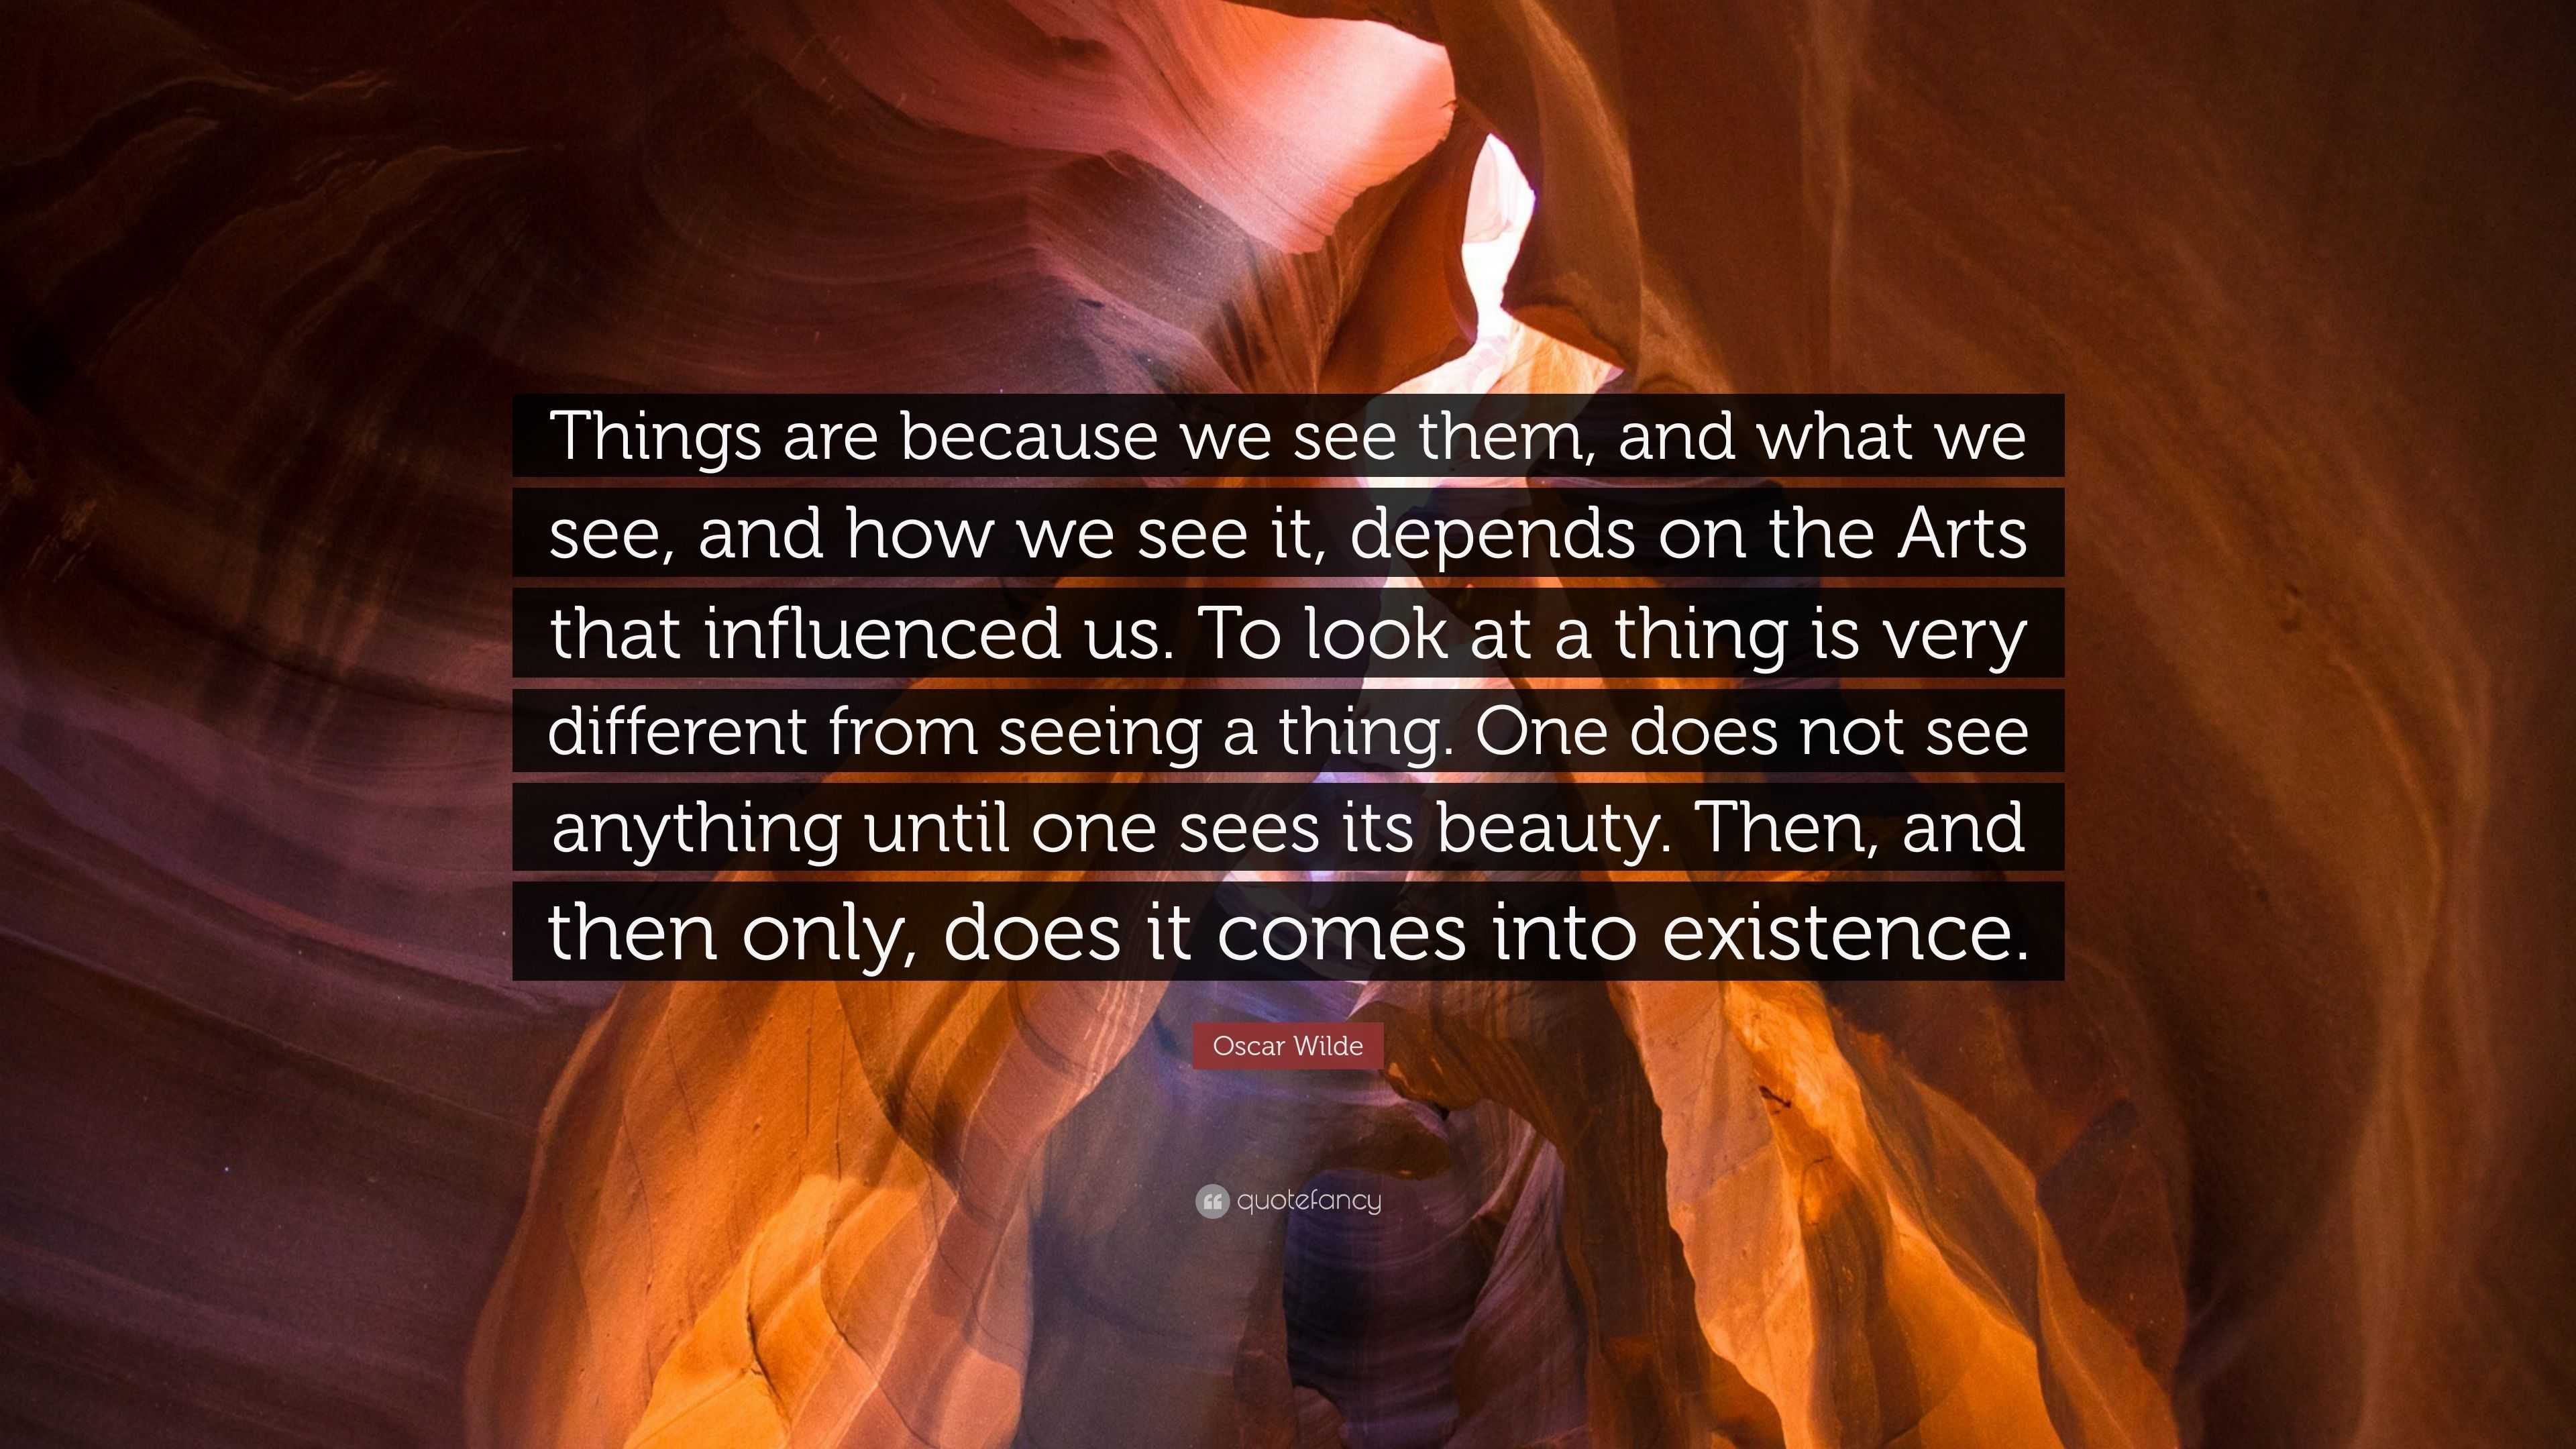 Oscar Wilde Quote: “Things are because we see them, and what we see, and how  we see it, depends on the Arts that influenced us. To look at a”